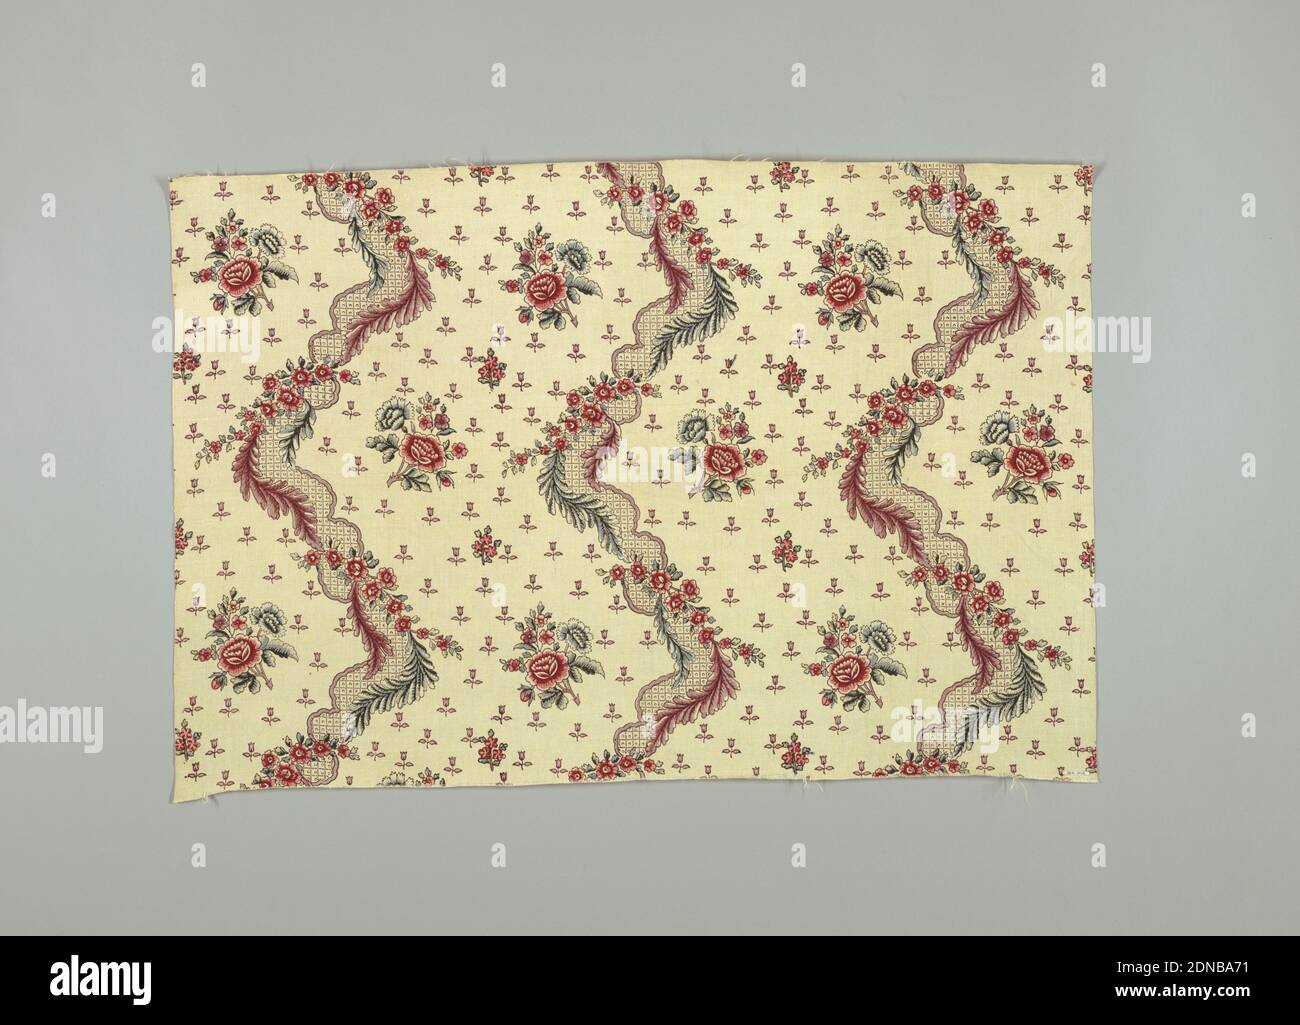 Textile, Medium: cotton Technique: printed on plain weave, Undulating columns of diaper pattern with flowers and leaves, alternating with white areas dotted with floral spars and small stylized tulips., France, late 19th–early 20th century, printed, dyed & painted textiles, Textile Stock Photo